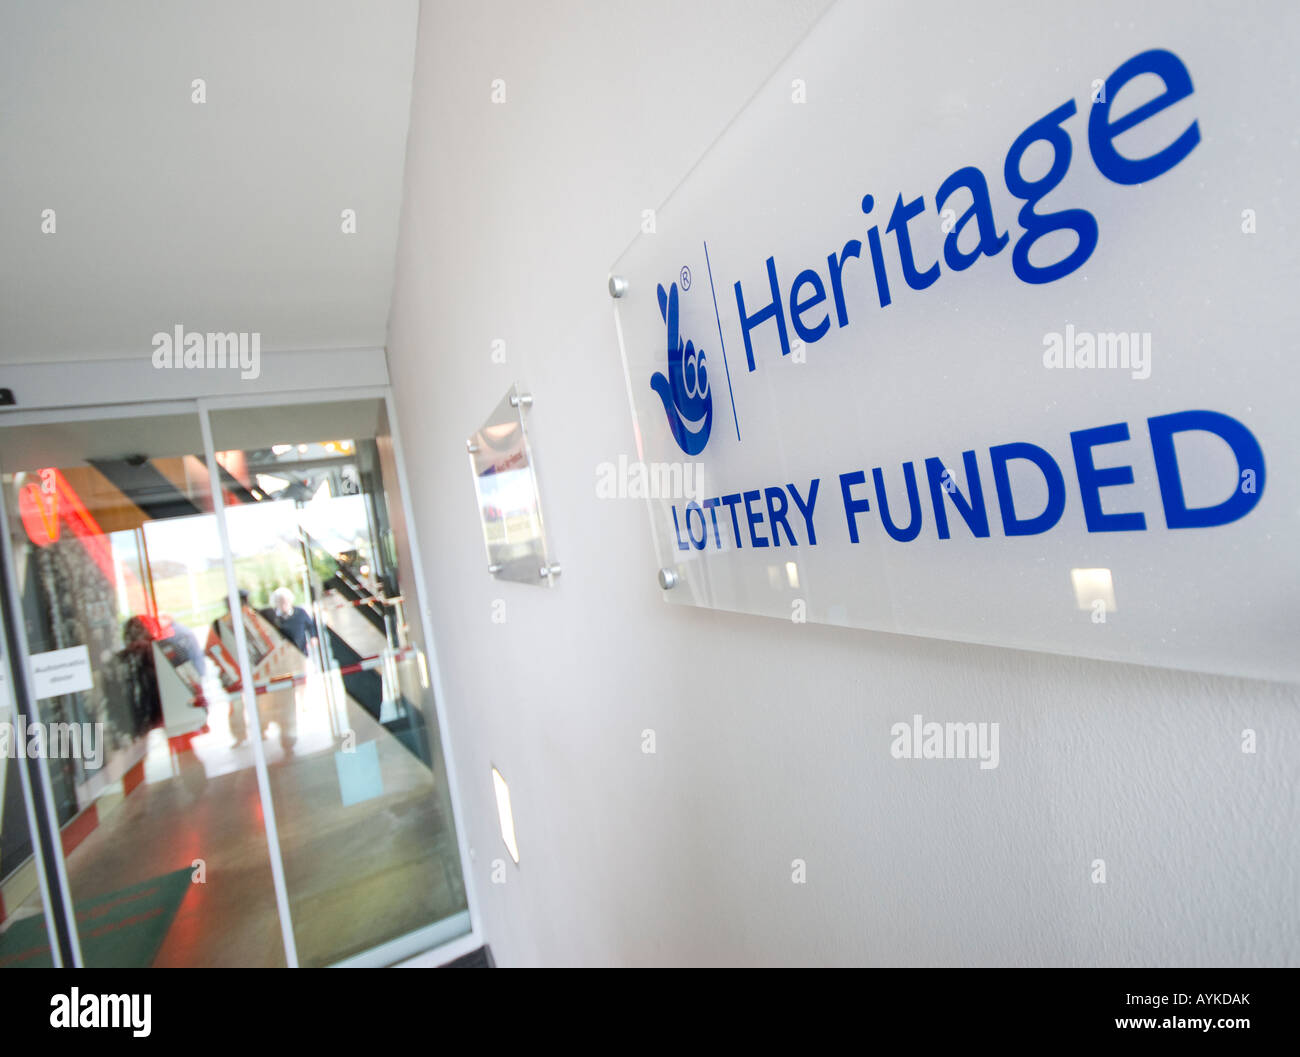 Heritage Lottery Funded sign Stock Photo